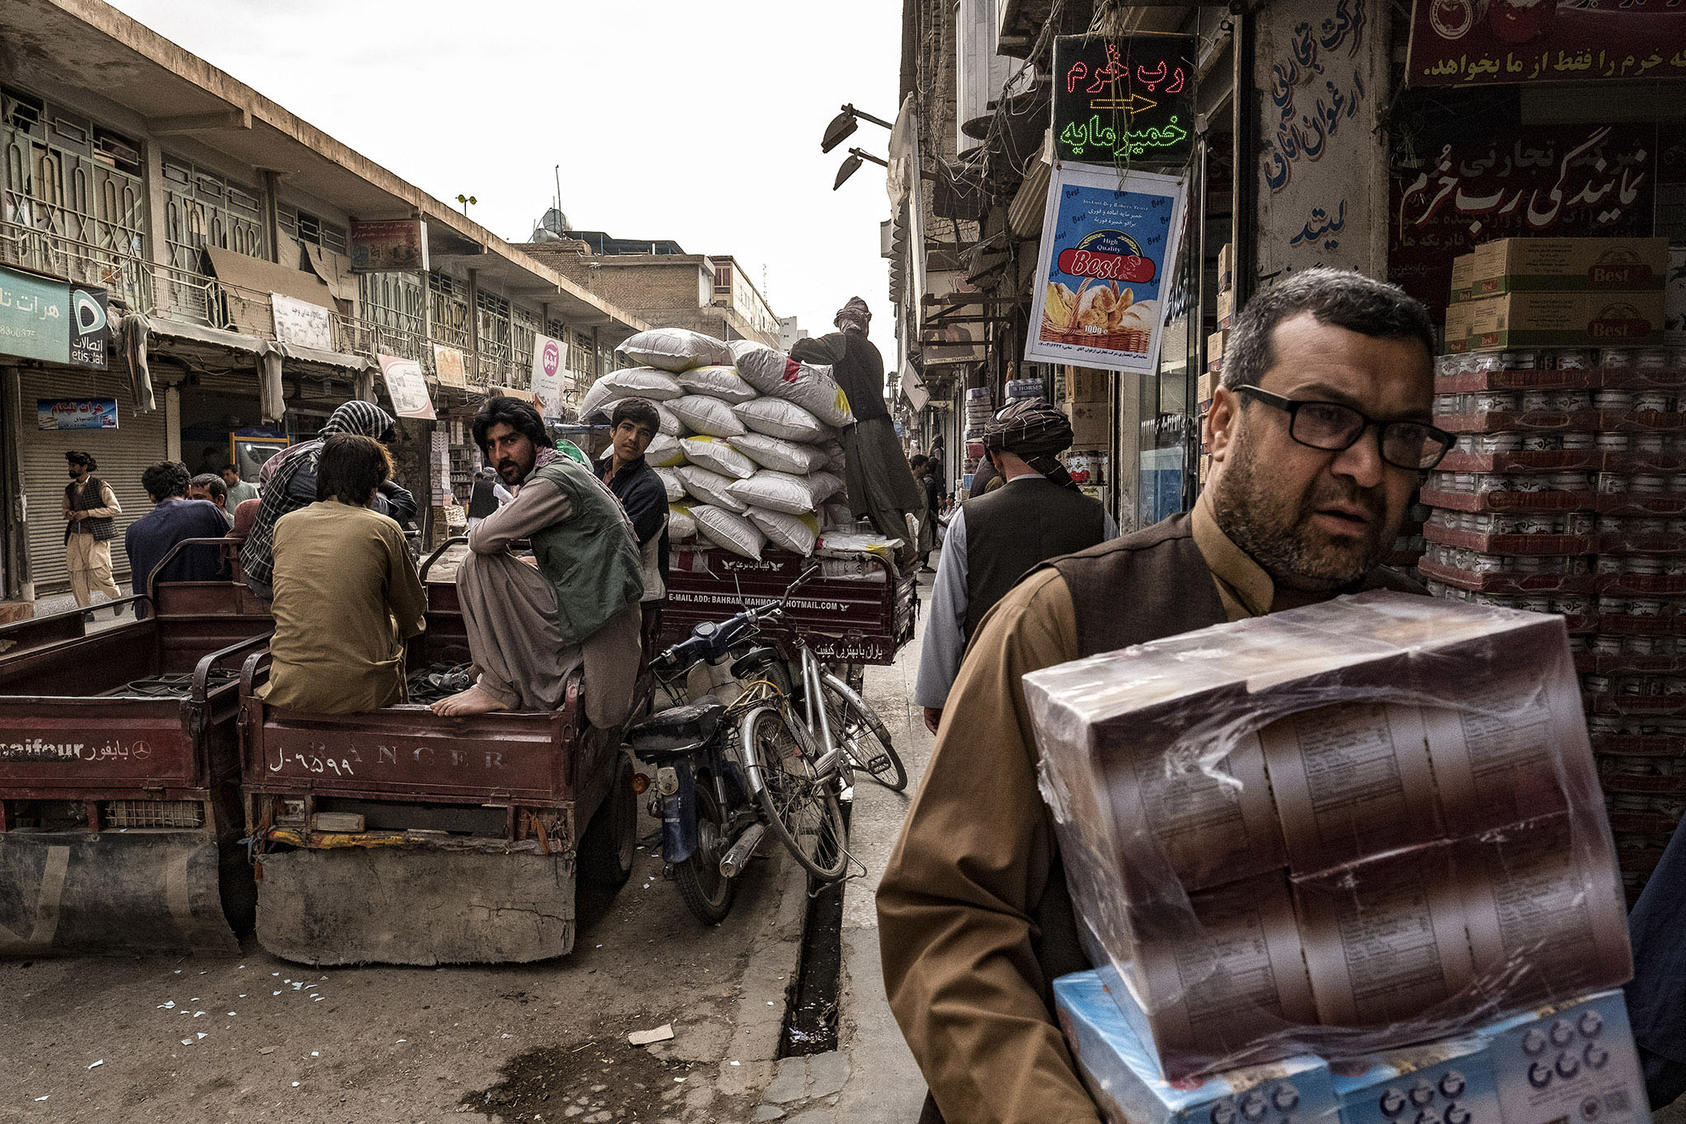 Afghan laborers and merchants moved goods through a bazaar known for Iranian dry foodstuffs and other sundries in Herat, Afghanistan, which is sometimes called “Little Iran,” April 16, 2017. (Bryan Denton/The New York Times)